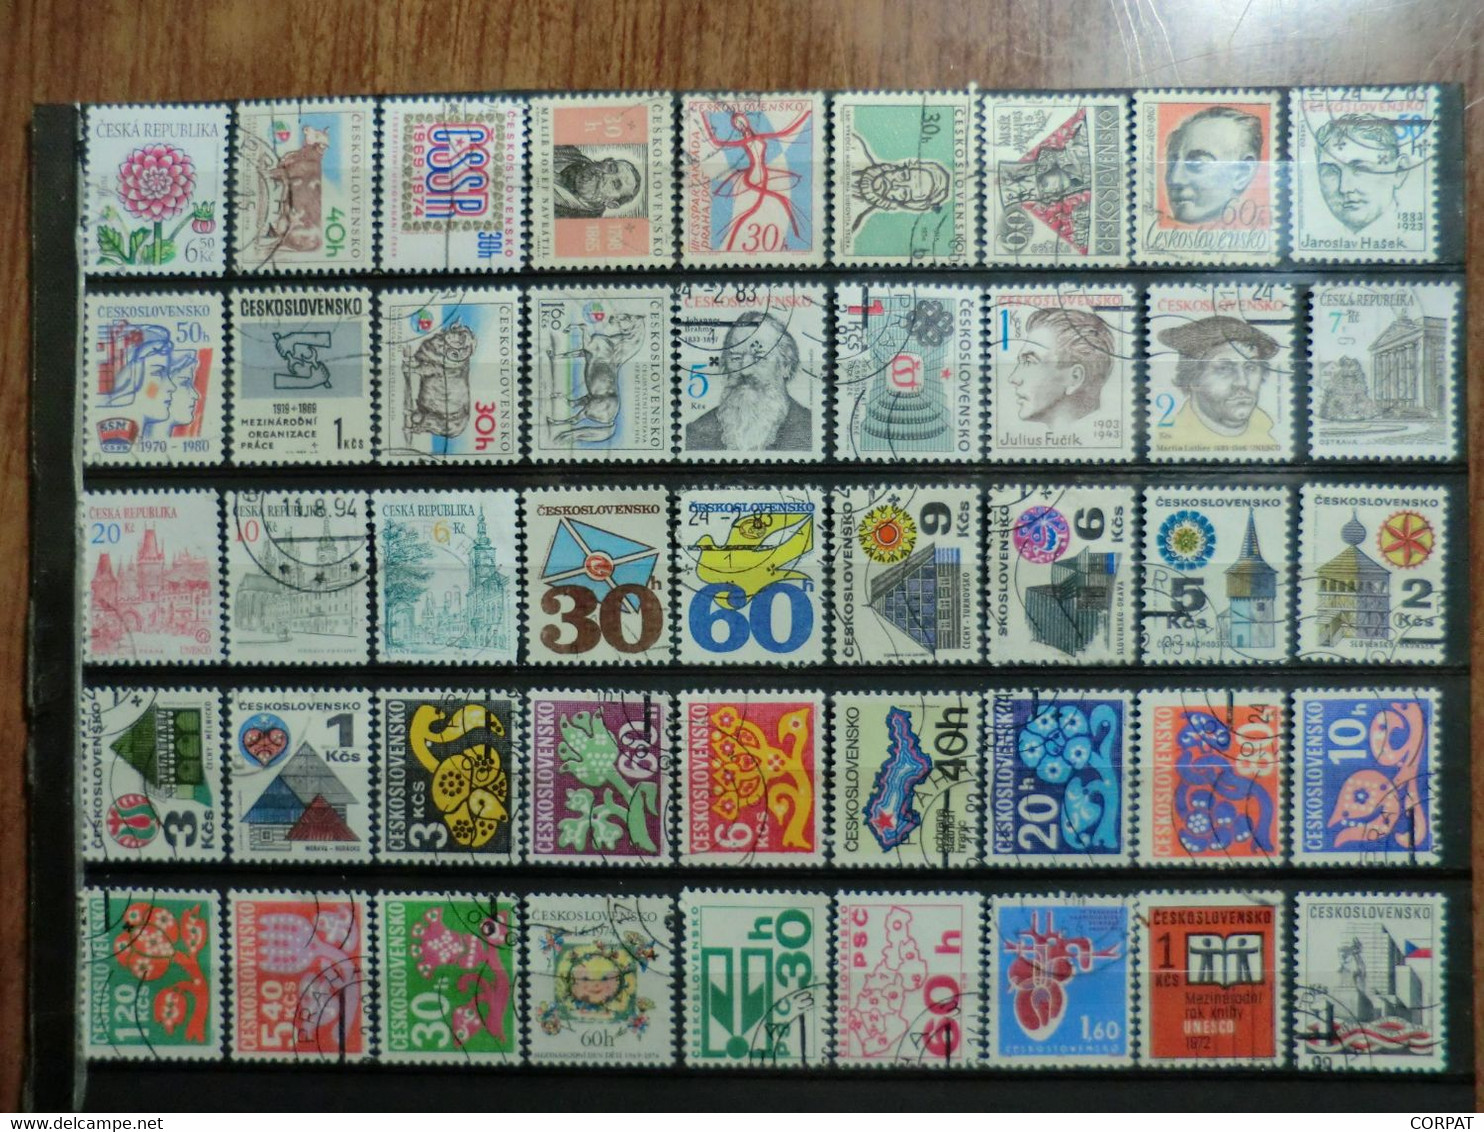 CECOSLOVACCHIA,used  stamps  (9 photos)